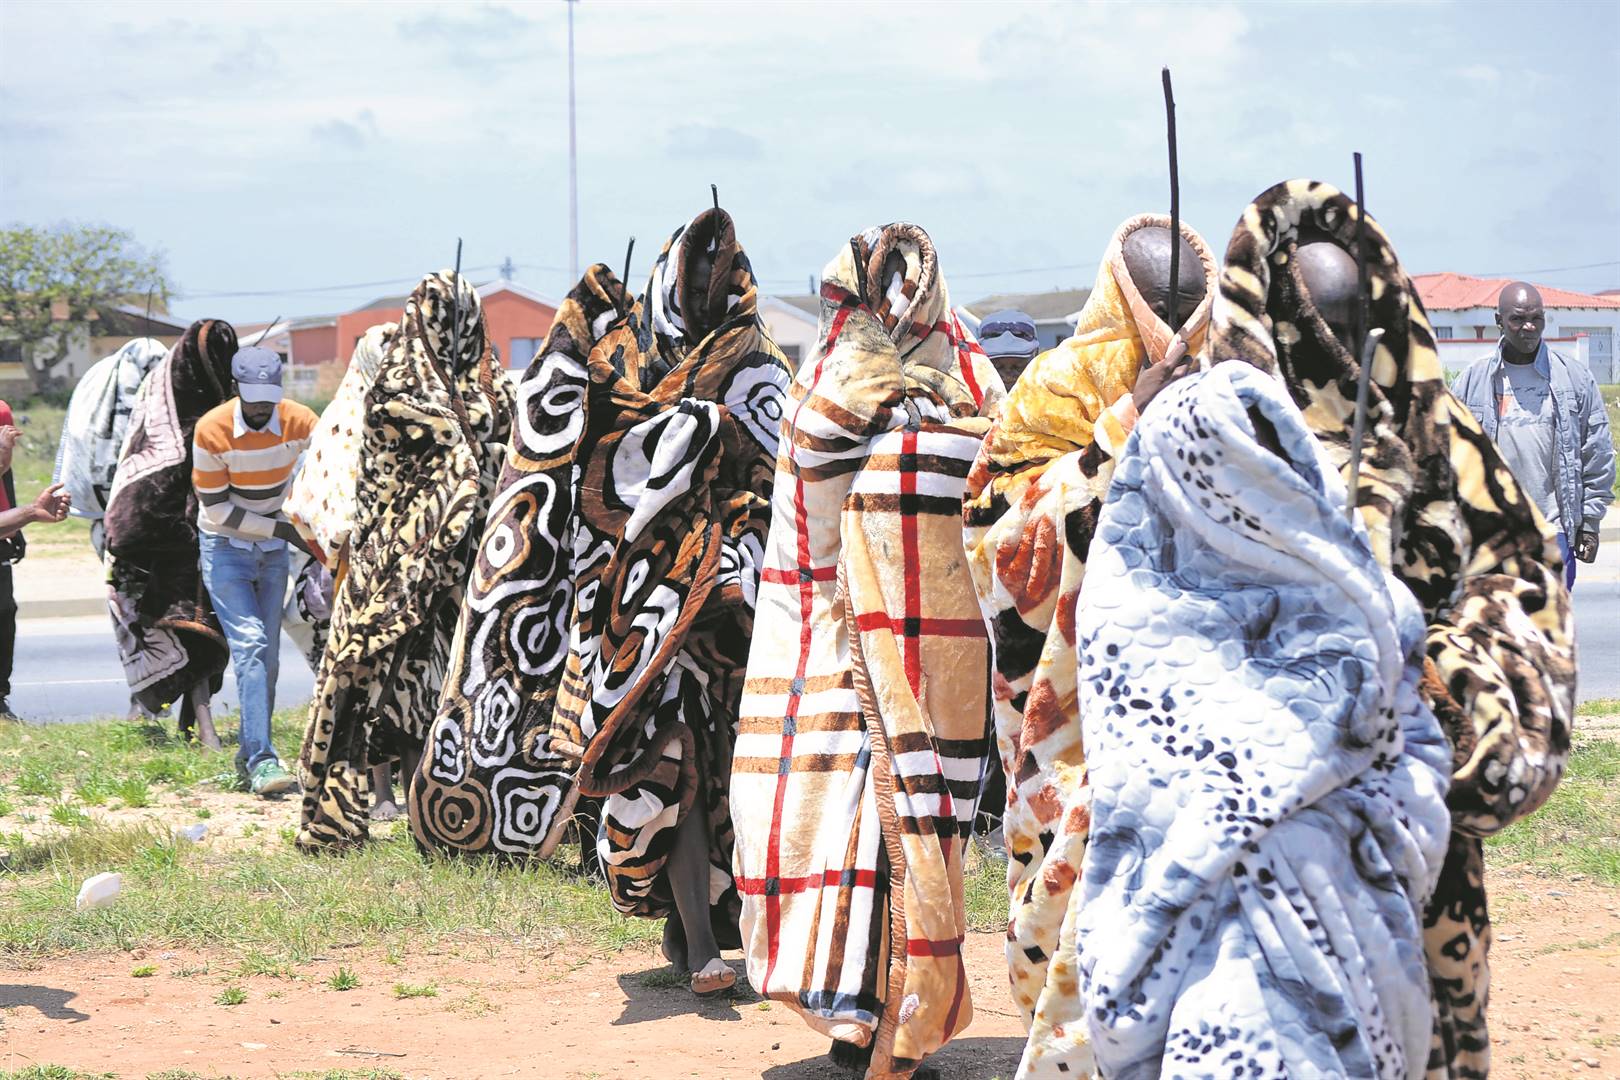 The initiation schools are expected to fill up with young boys and girls next week.